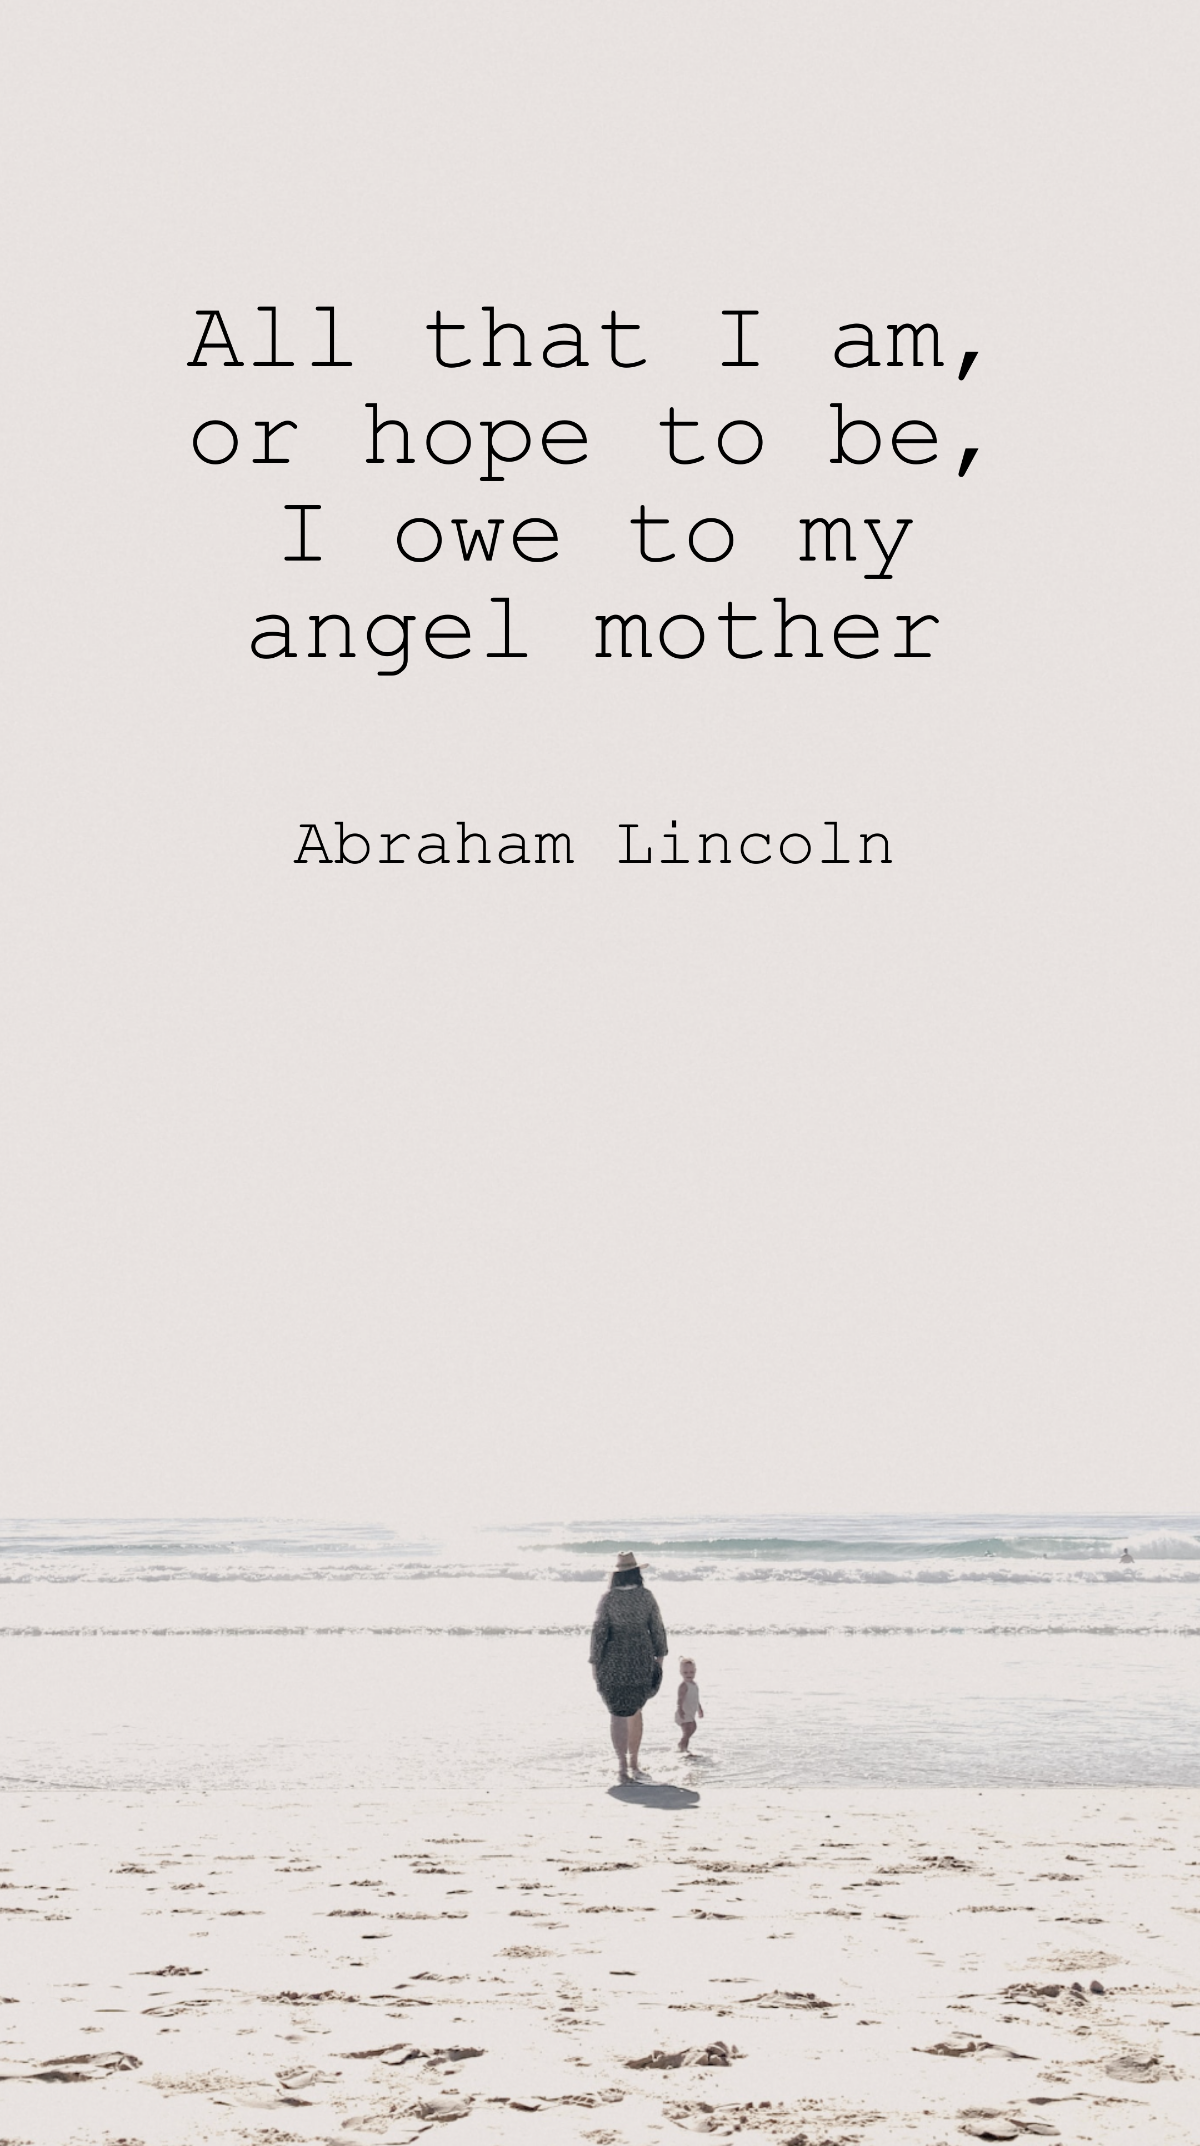 Abraham Lincoln - All that I am, or hope to be, I owe to my angel mother.  Template